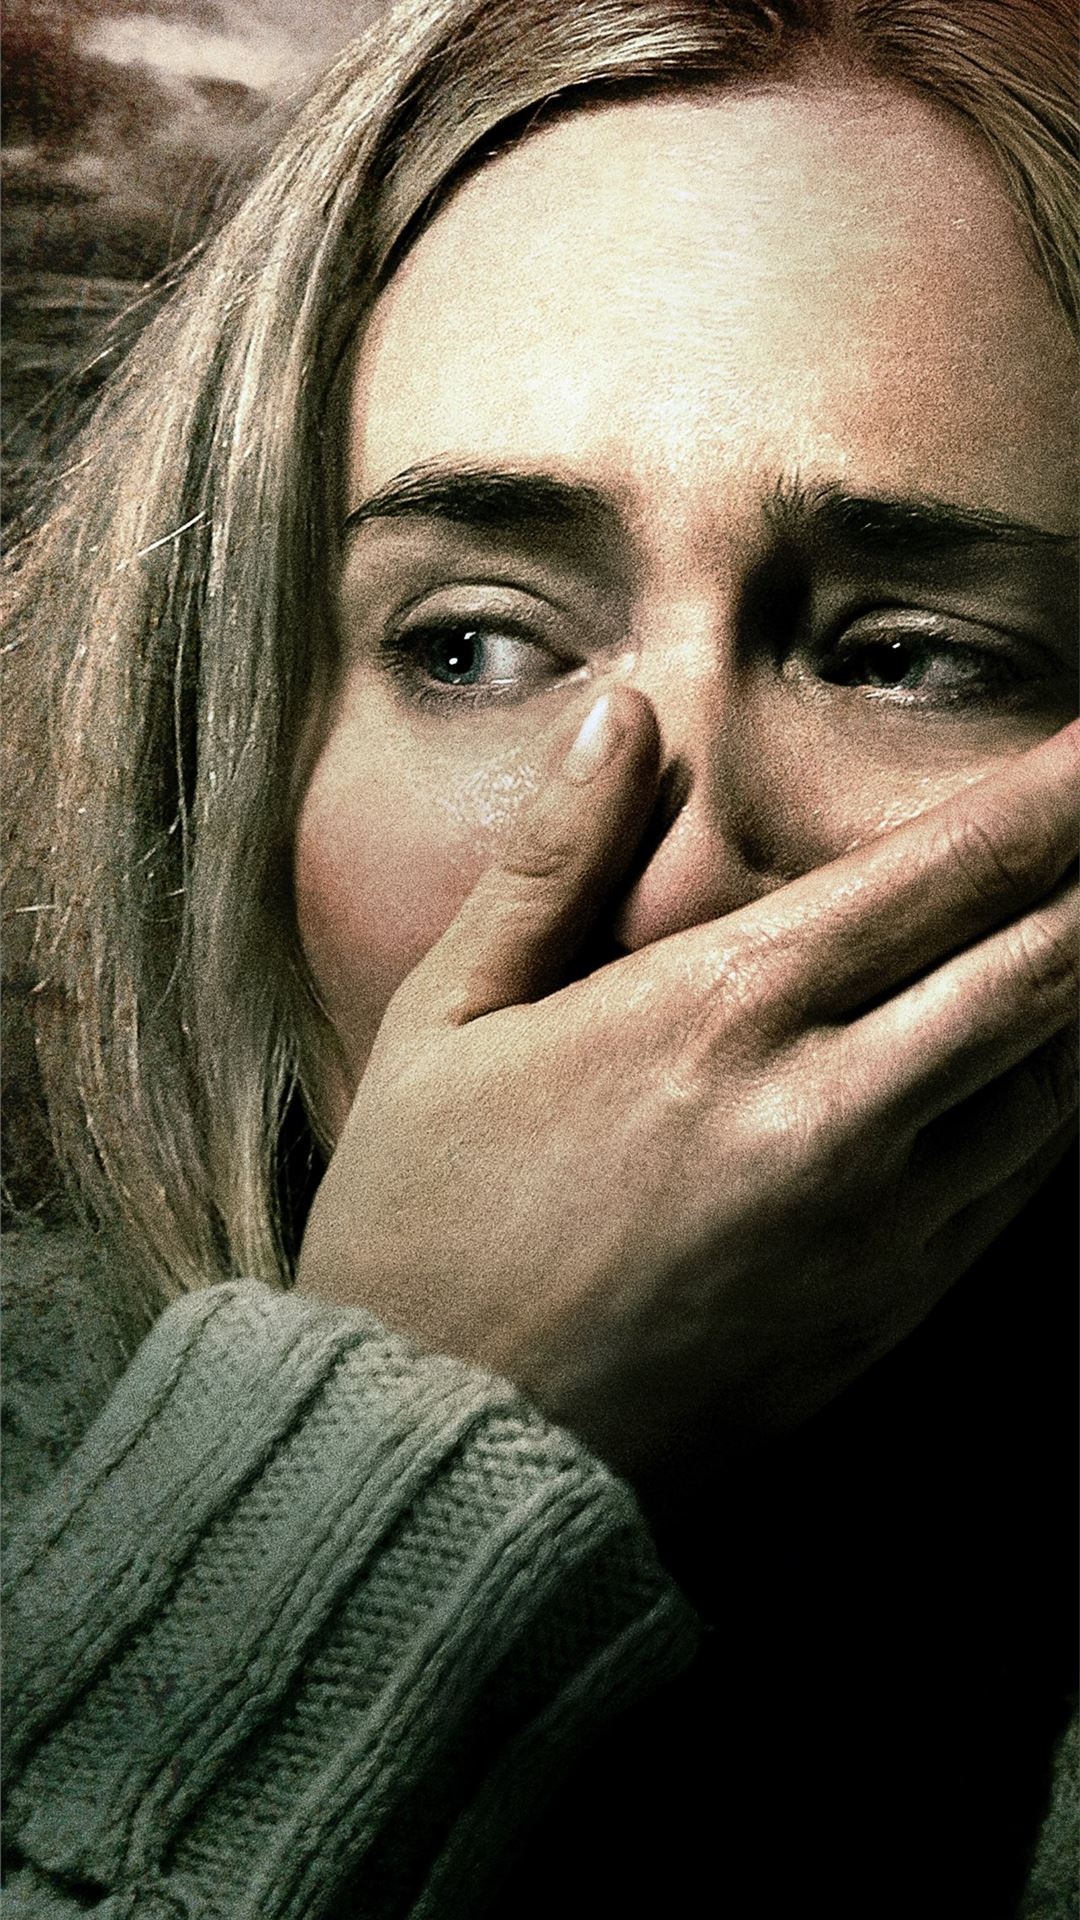 A Quiet Place movie iPhone wallpapers, Free download, Atmospheric beauty, Silent thriller, 1080x1920 Full HD Phone